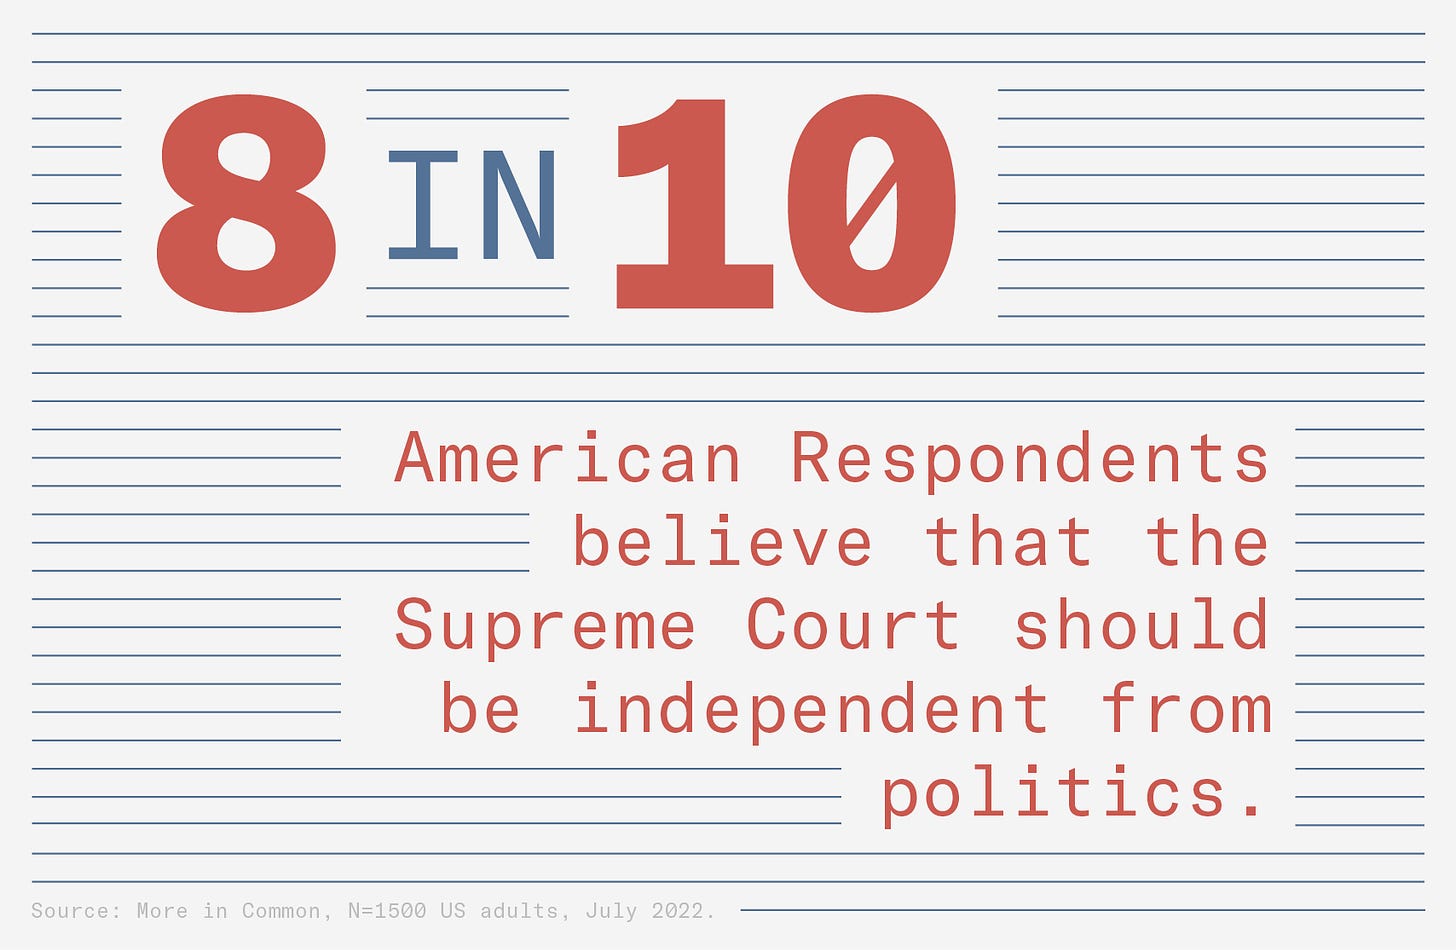 8 in 10 American Respondents believe that the Supreme Court should be independent from politics. Source: More in Common, N=1500 US adults, July 2022.